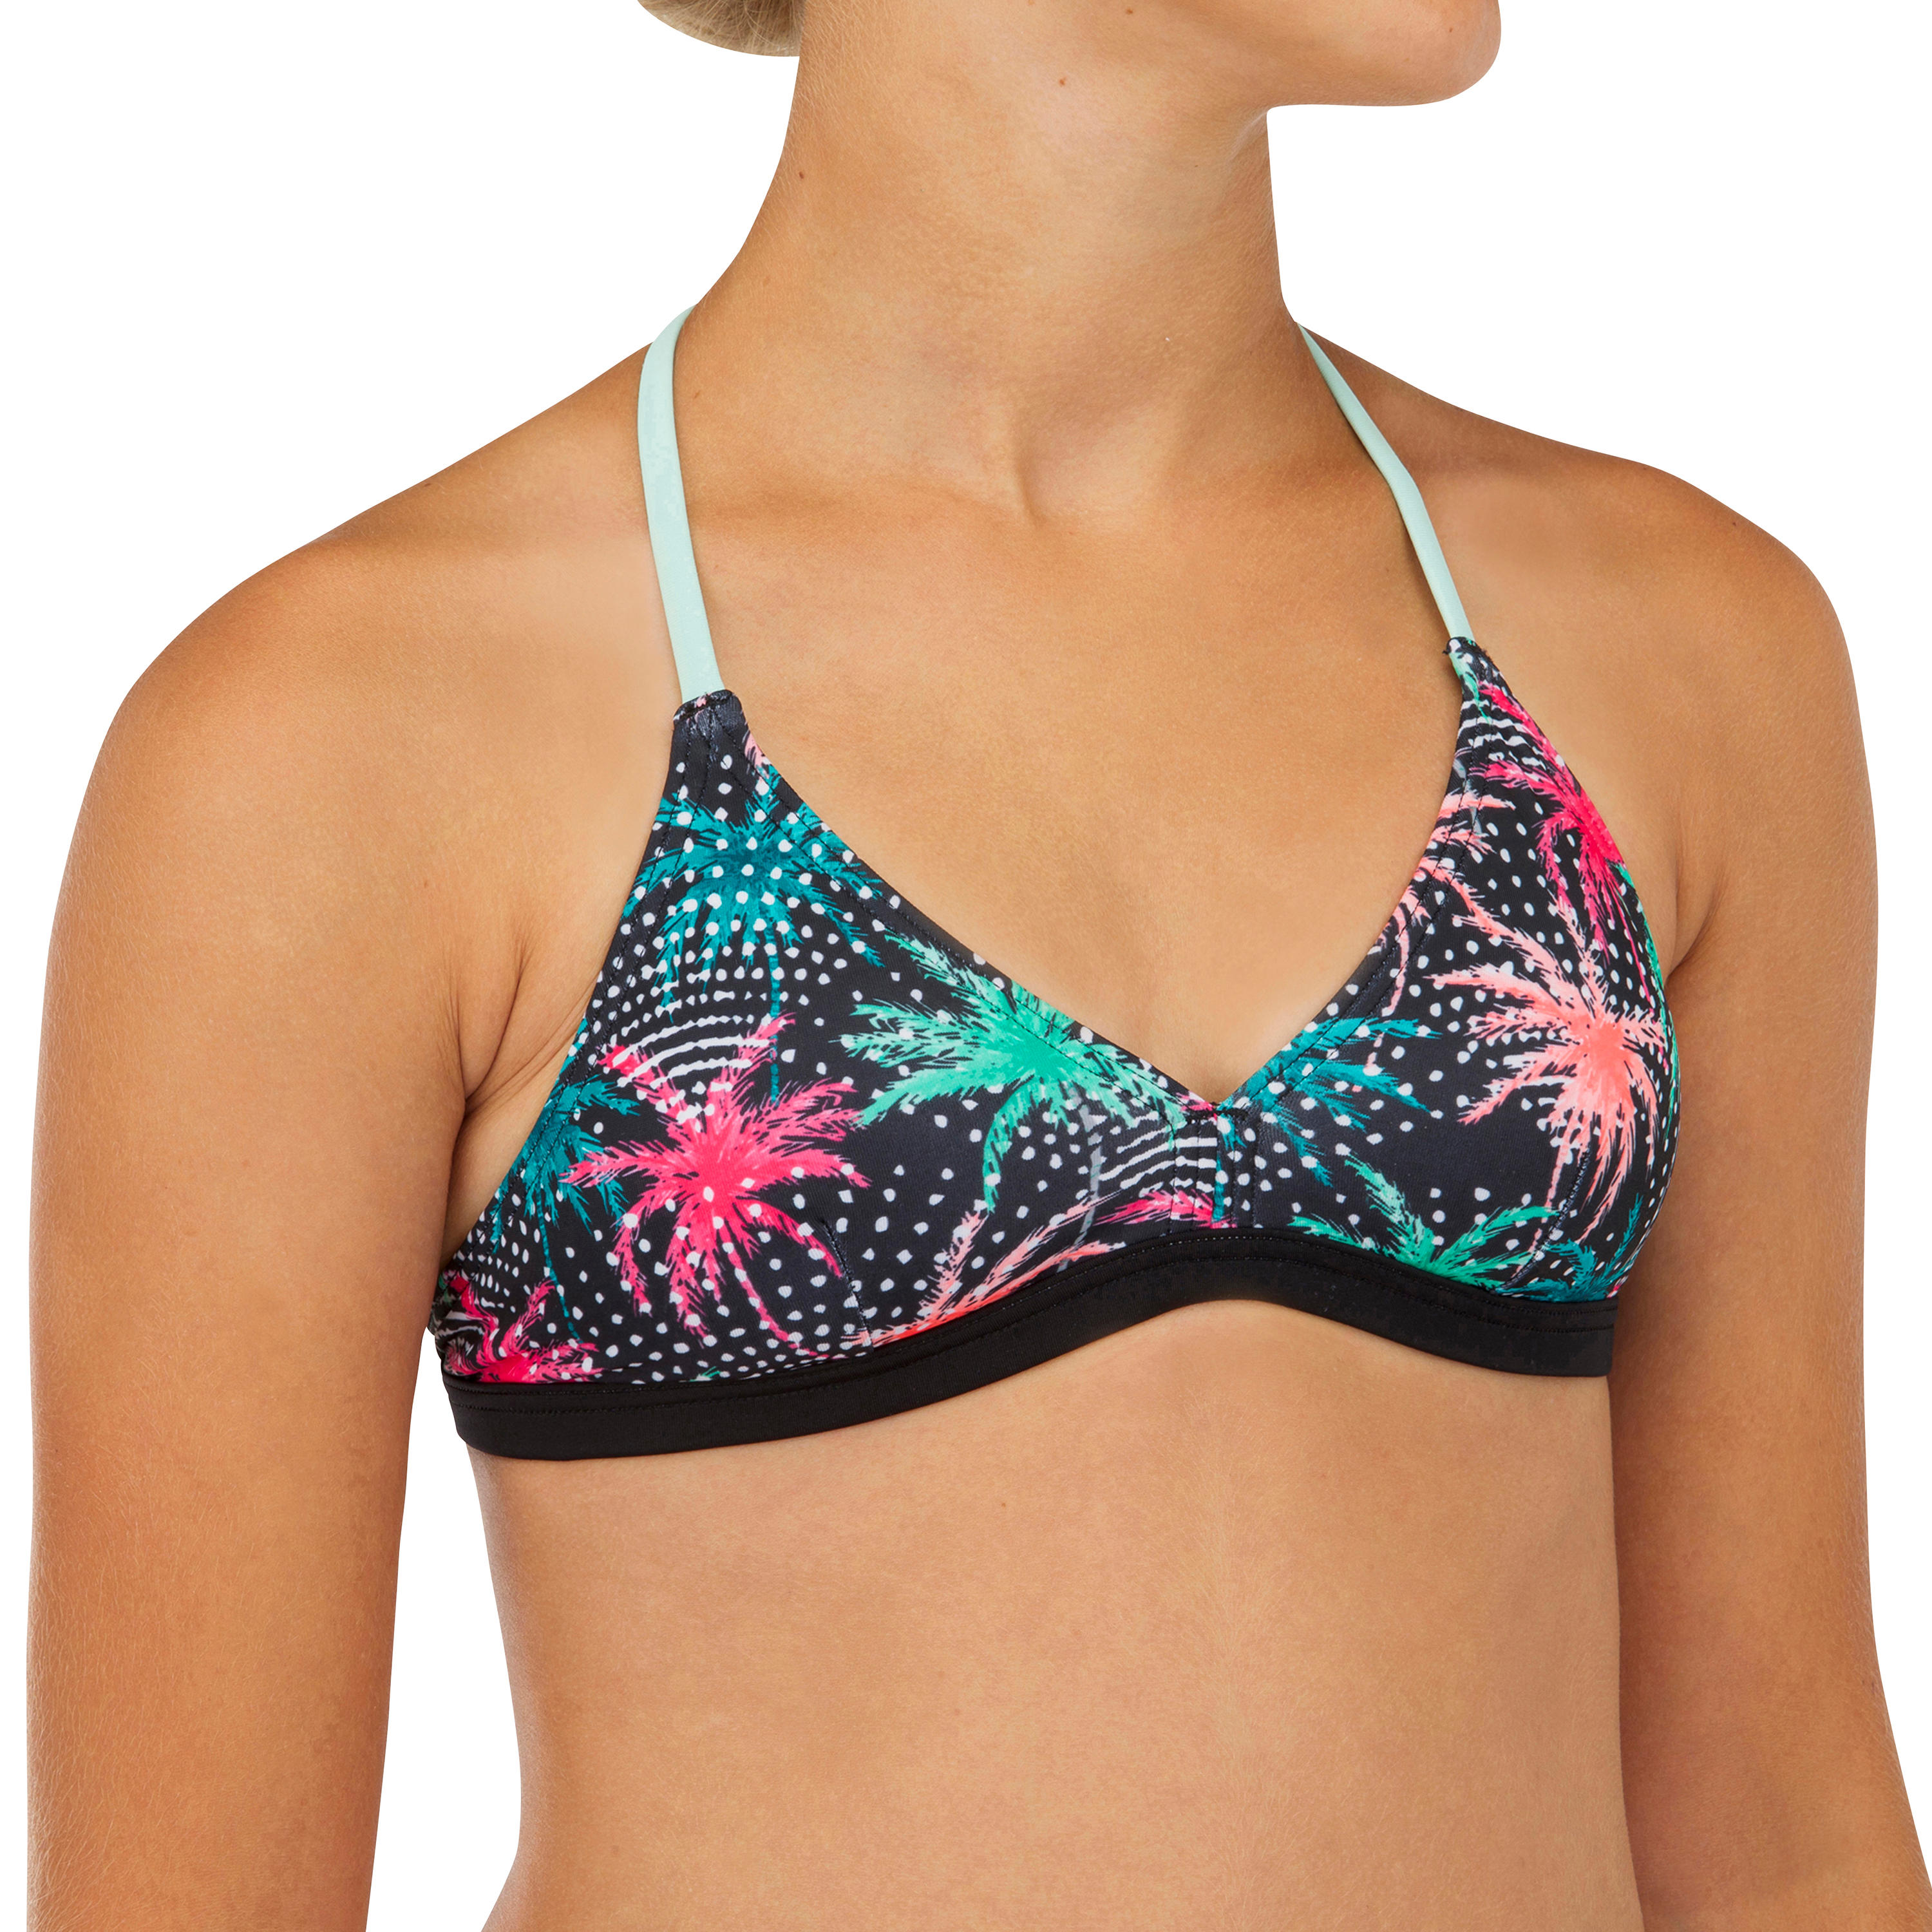 OLAIAN GIRL'S SURF SWIMSUIT TRIANGLE TOP BETTY 500 BLACK